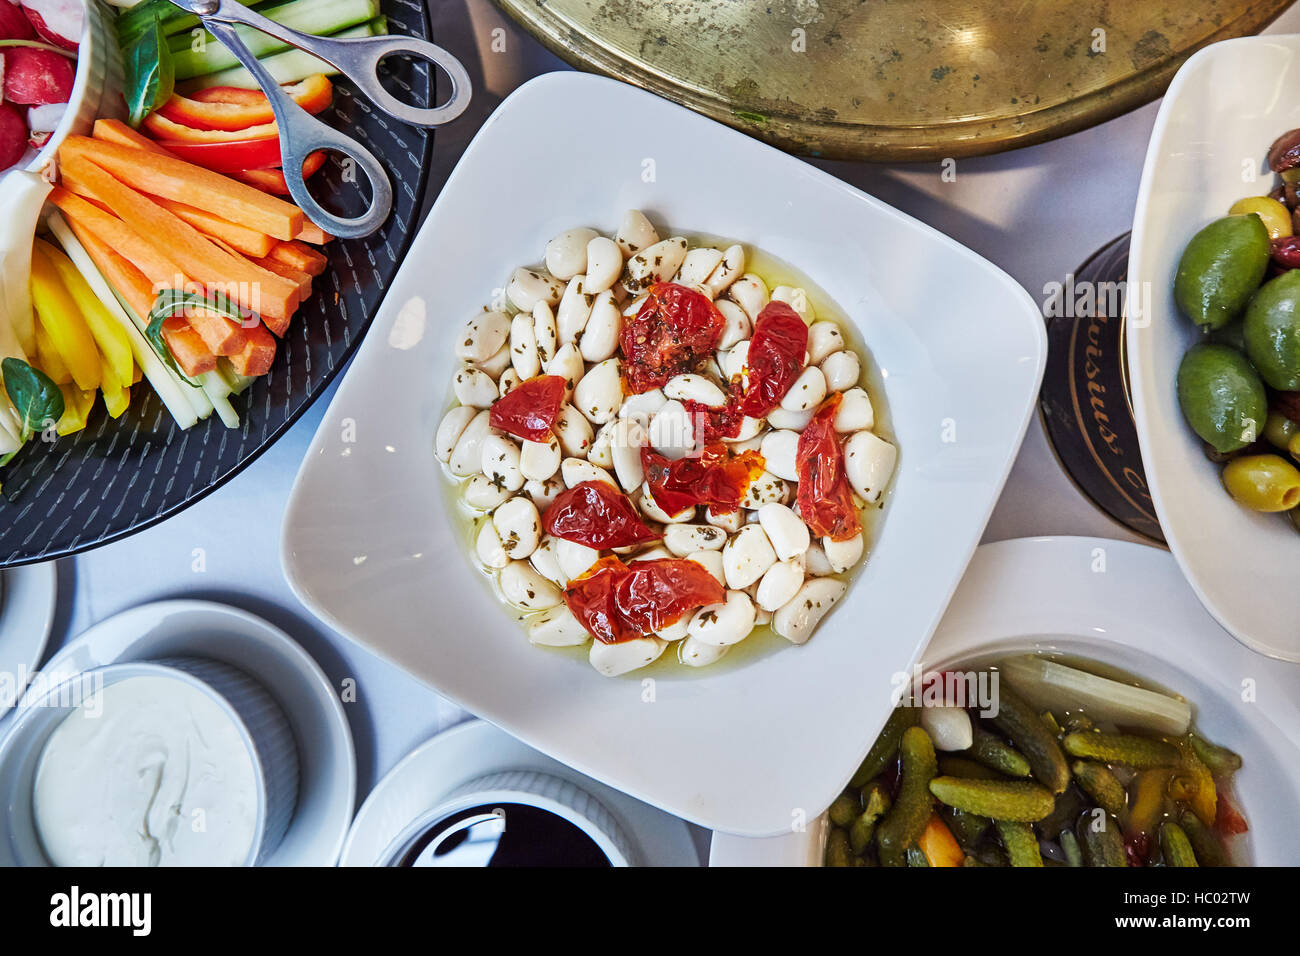 Italian Brunch, selection of antipasti from the buffet such as cut vegetables, garlic, olives, pickles, and sauces Stock Photo